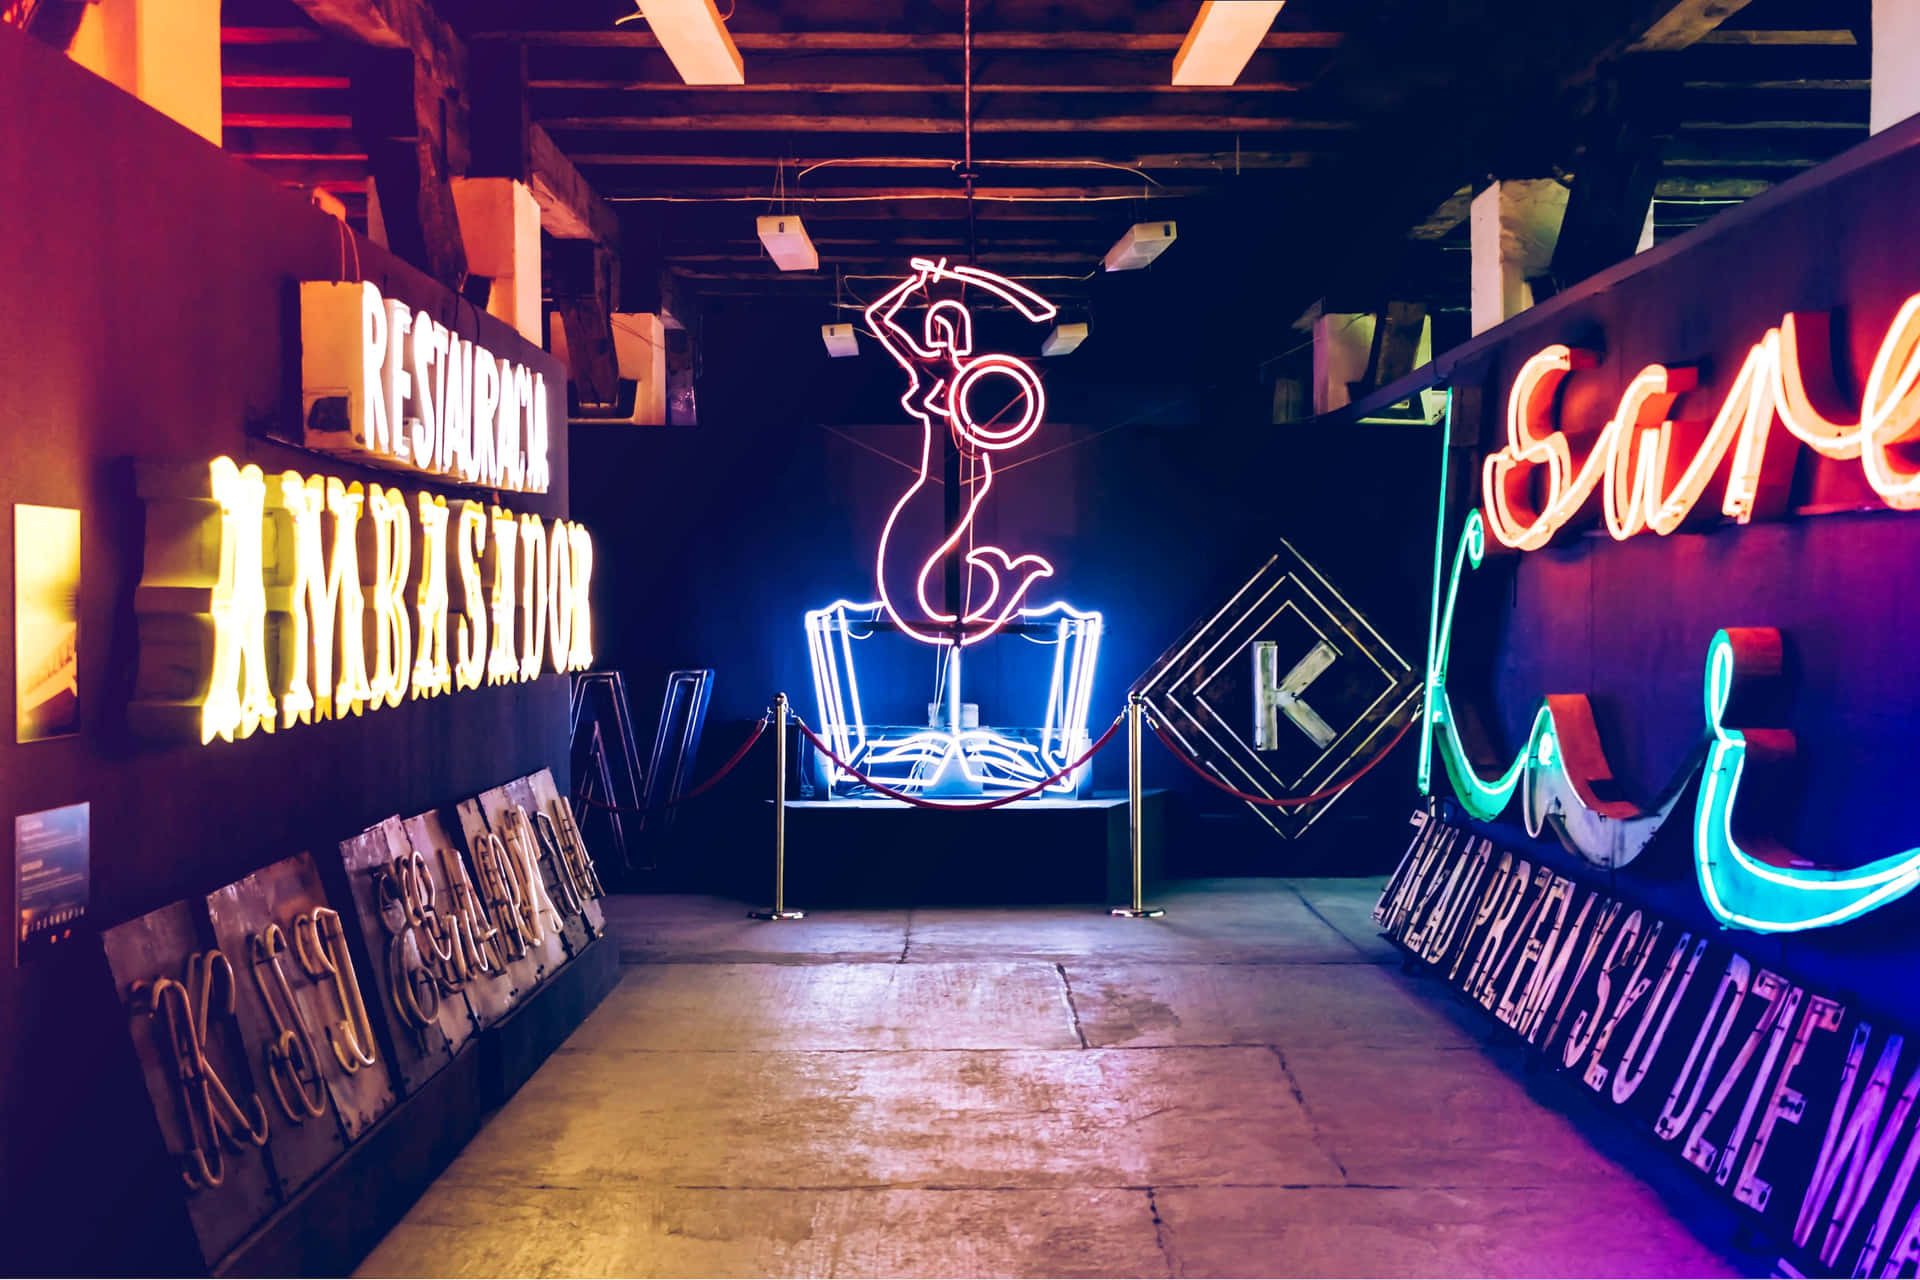 "Let your inner light shine with neon aesthetic grunge signs." Wallpaper